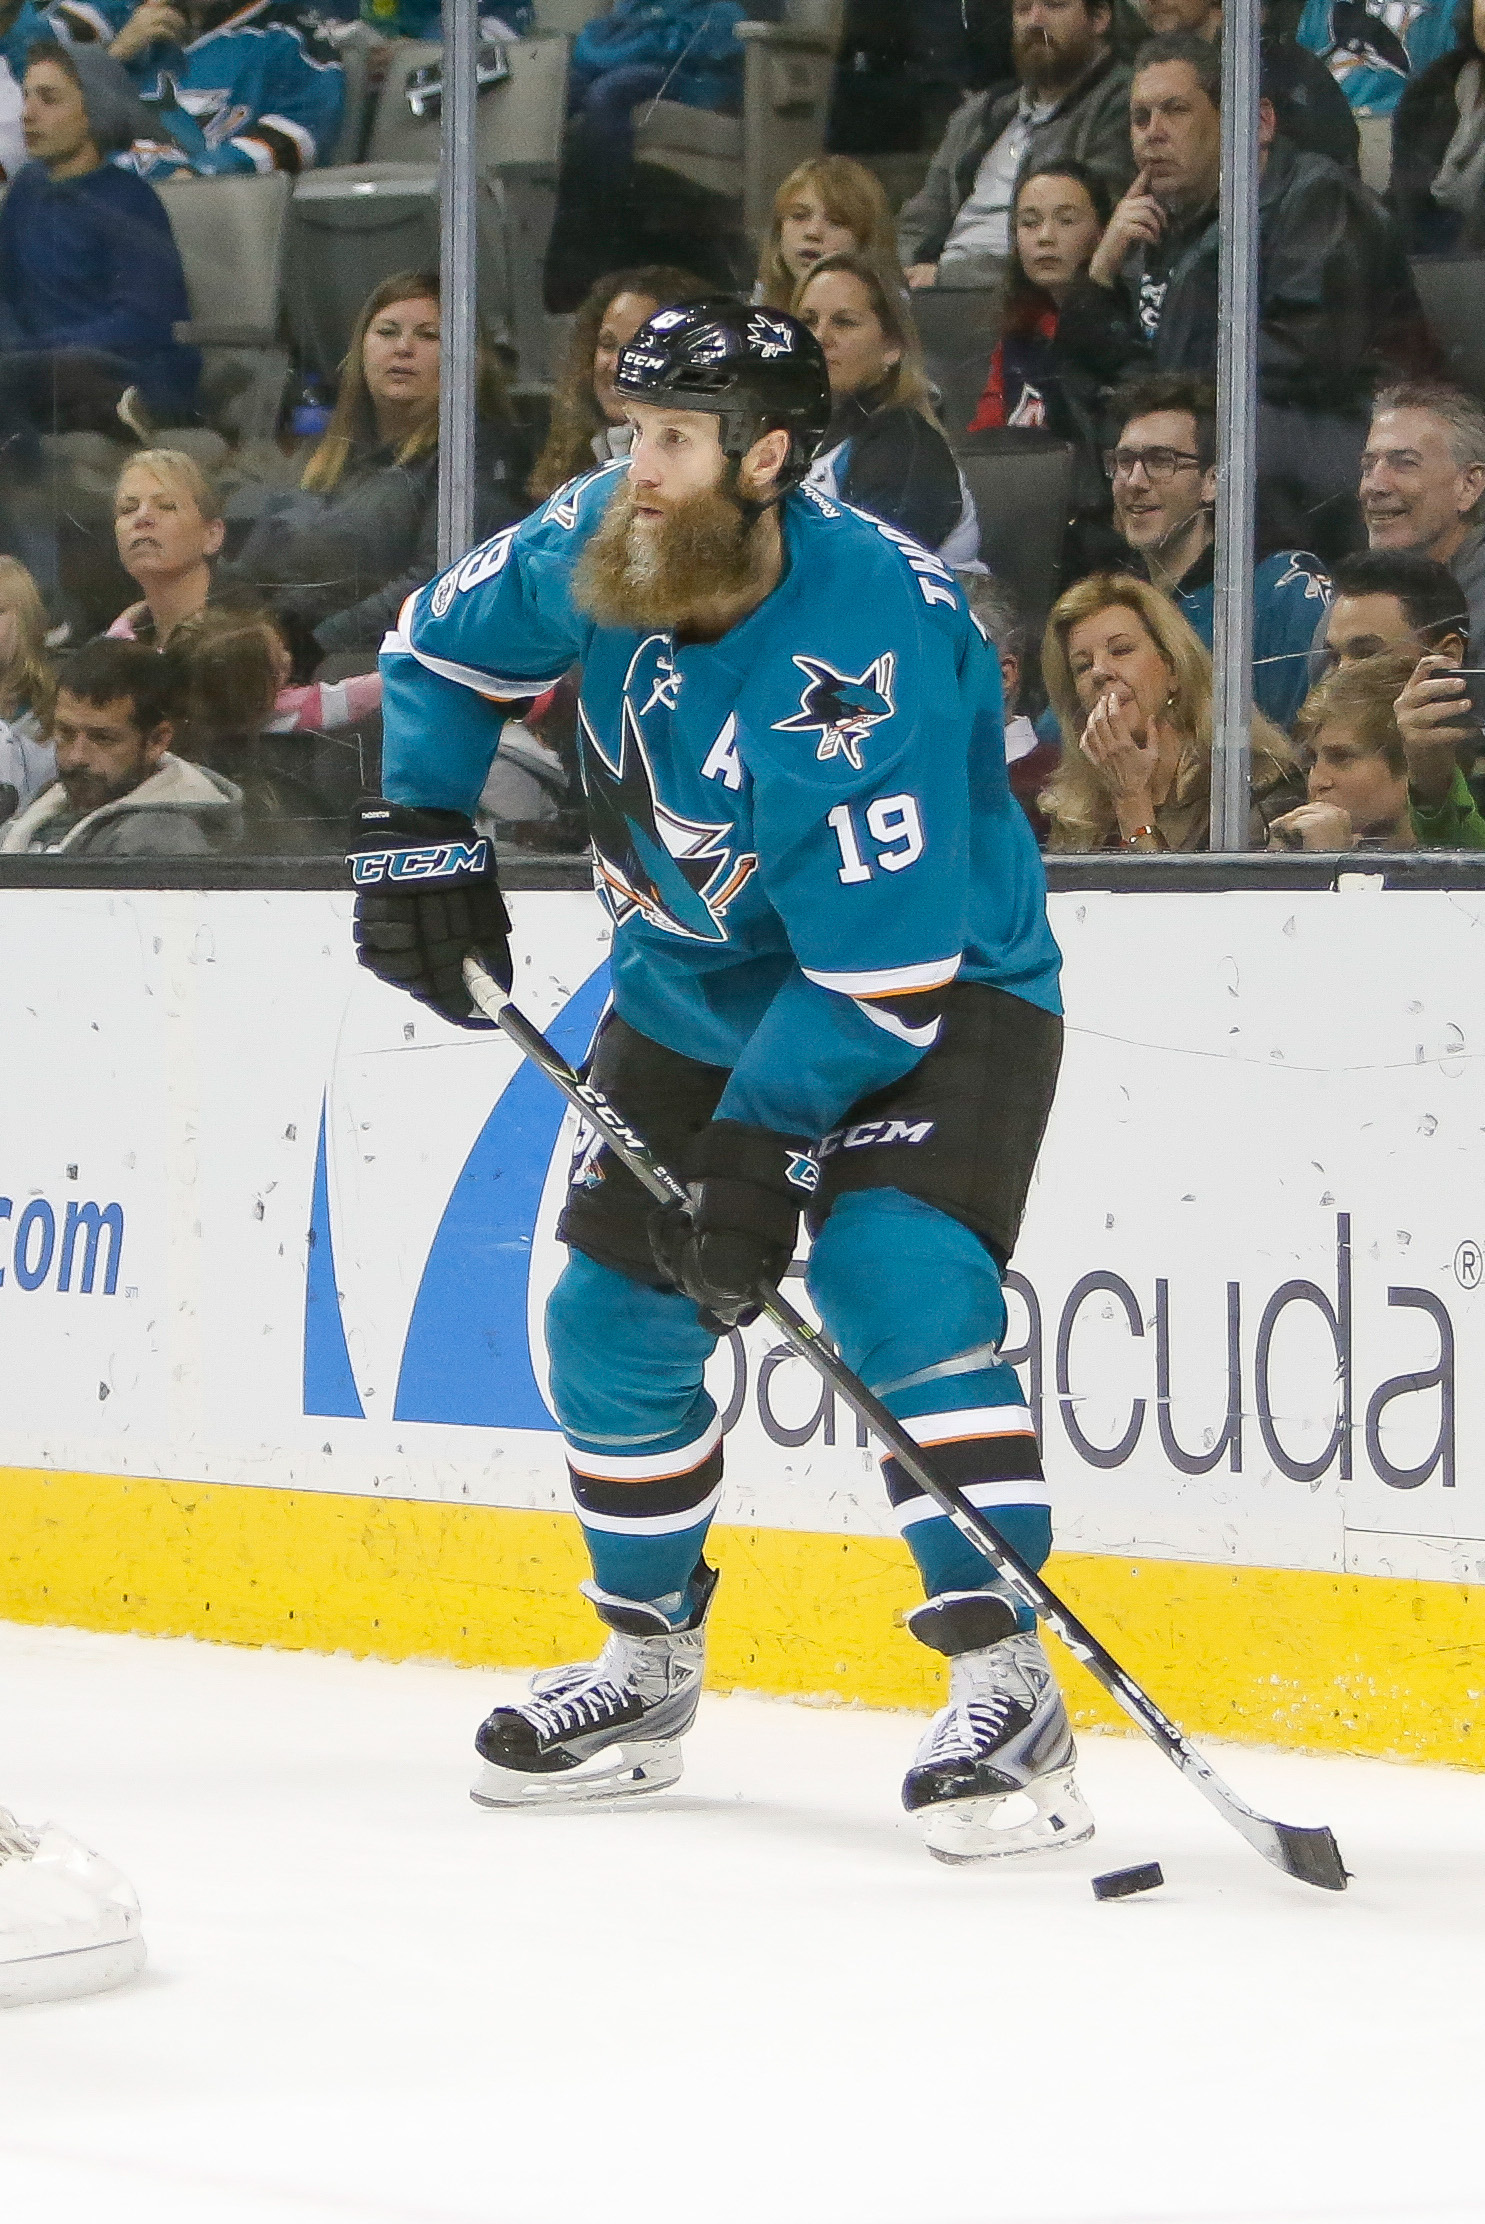 Joe Thornton skating with Sharks teammates again, but his status for the  playoffs remains uncertain - The Athletic